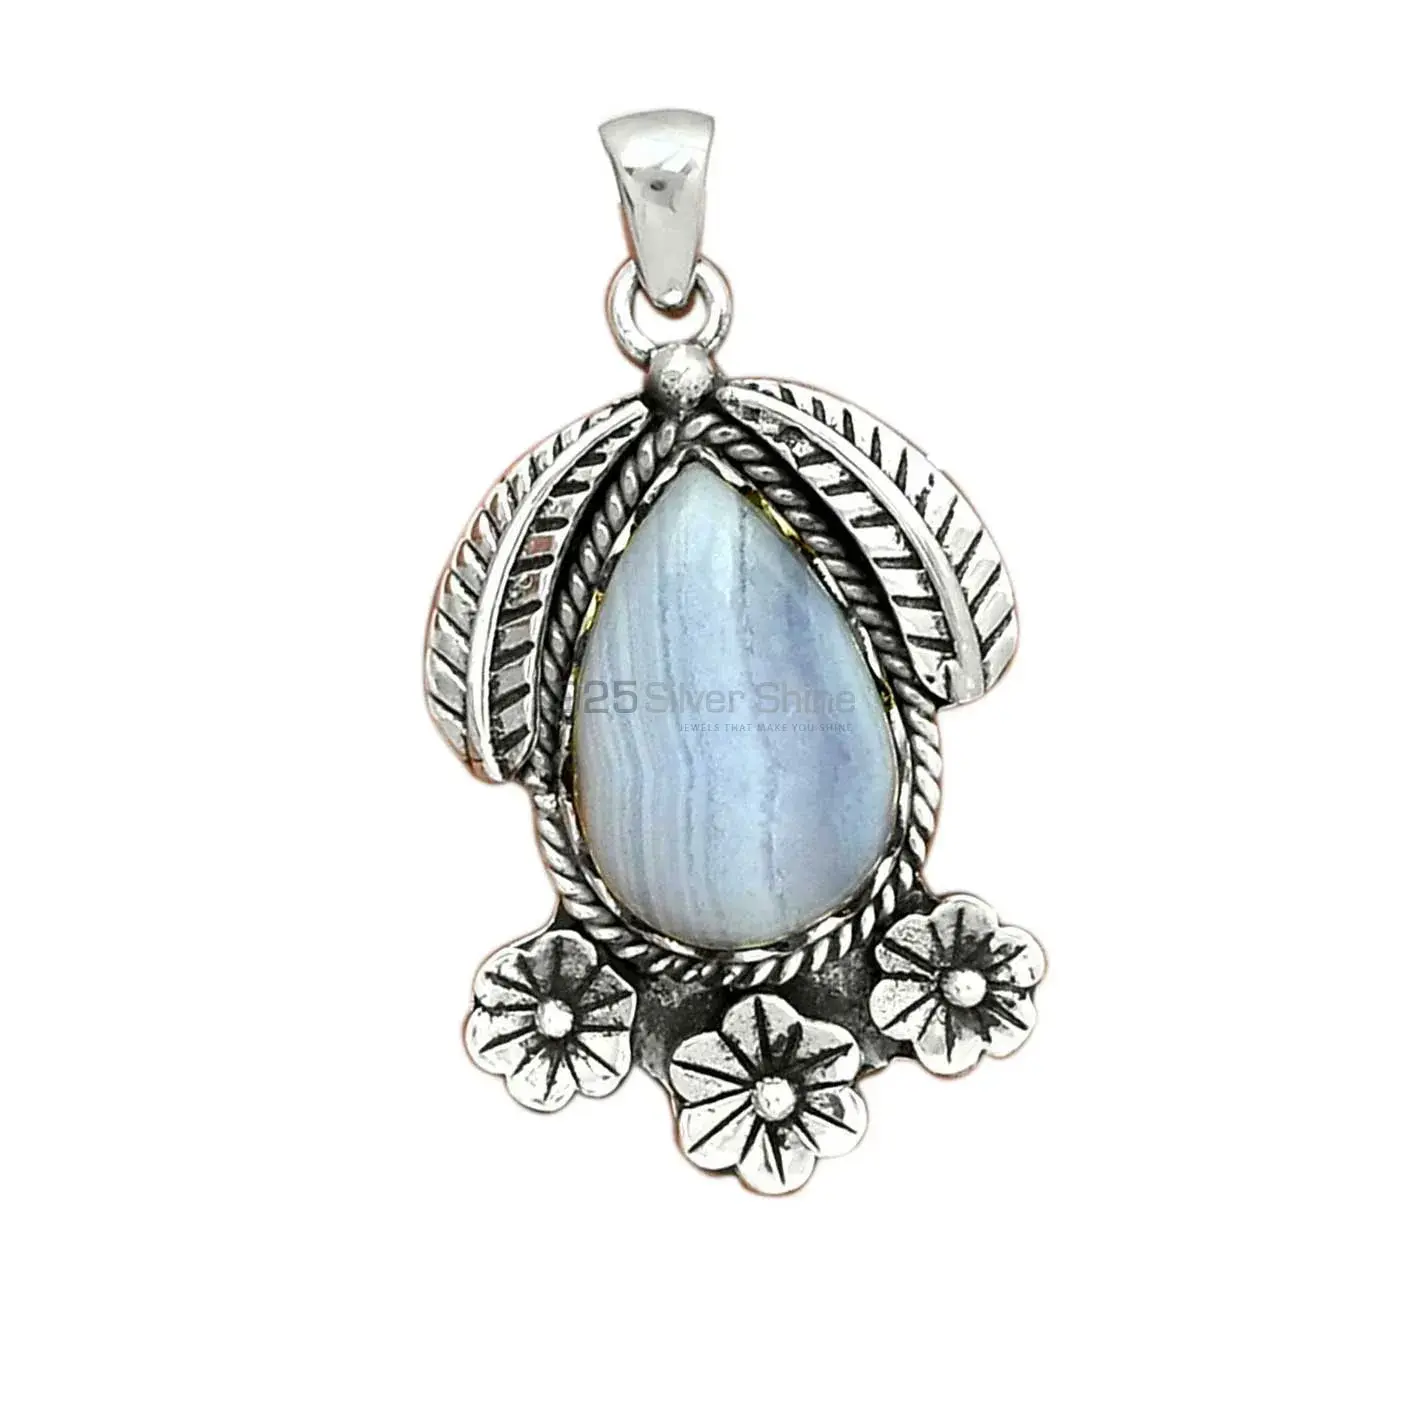 Best Quality Blue Lace Agate Gemstone Handmade Pendants In 925 Sterling Silver Jewelry 925SP091-4_1